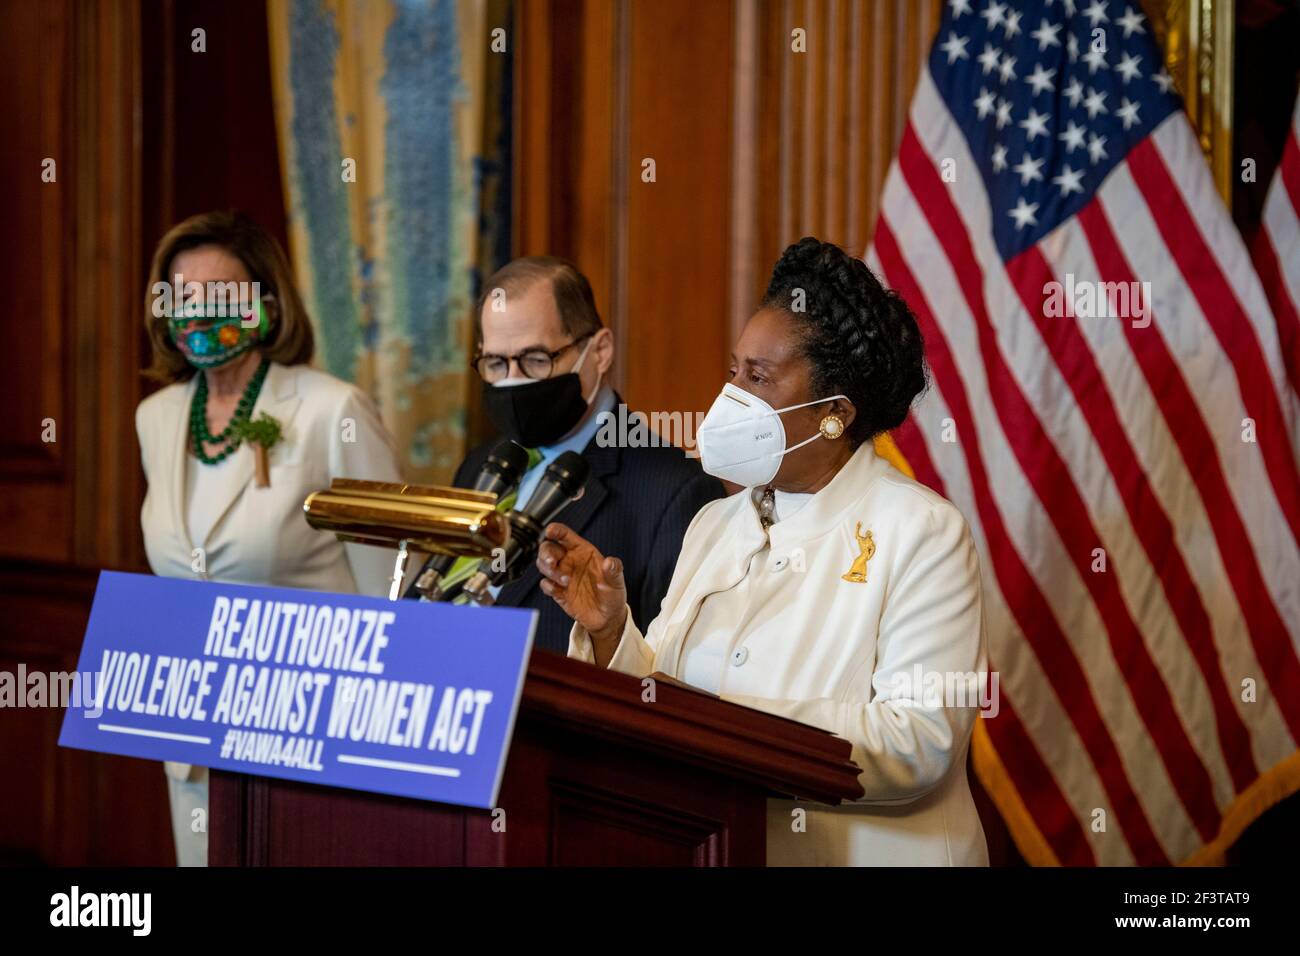 Speaker of the United States House of Representatives Nancy Pelosi (Democrat of California), left, and United States Representative Jerrold Nadler (Democrat of New York), center, listen while United States Representative Sheila Jackson-Lee (Democrat of Texas) offers remarks at a press conference regarding the Violence Against Women Act, at the U.S. Capitol in Washington, DC, Wednesday, March 17, 2021. Credit: Rod Lamkey/CNP | usage worldwide Stock Photo